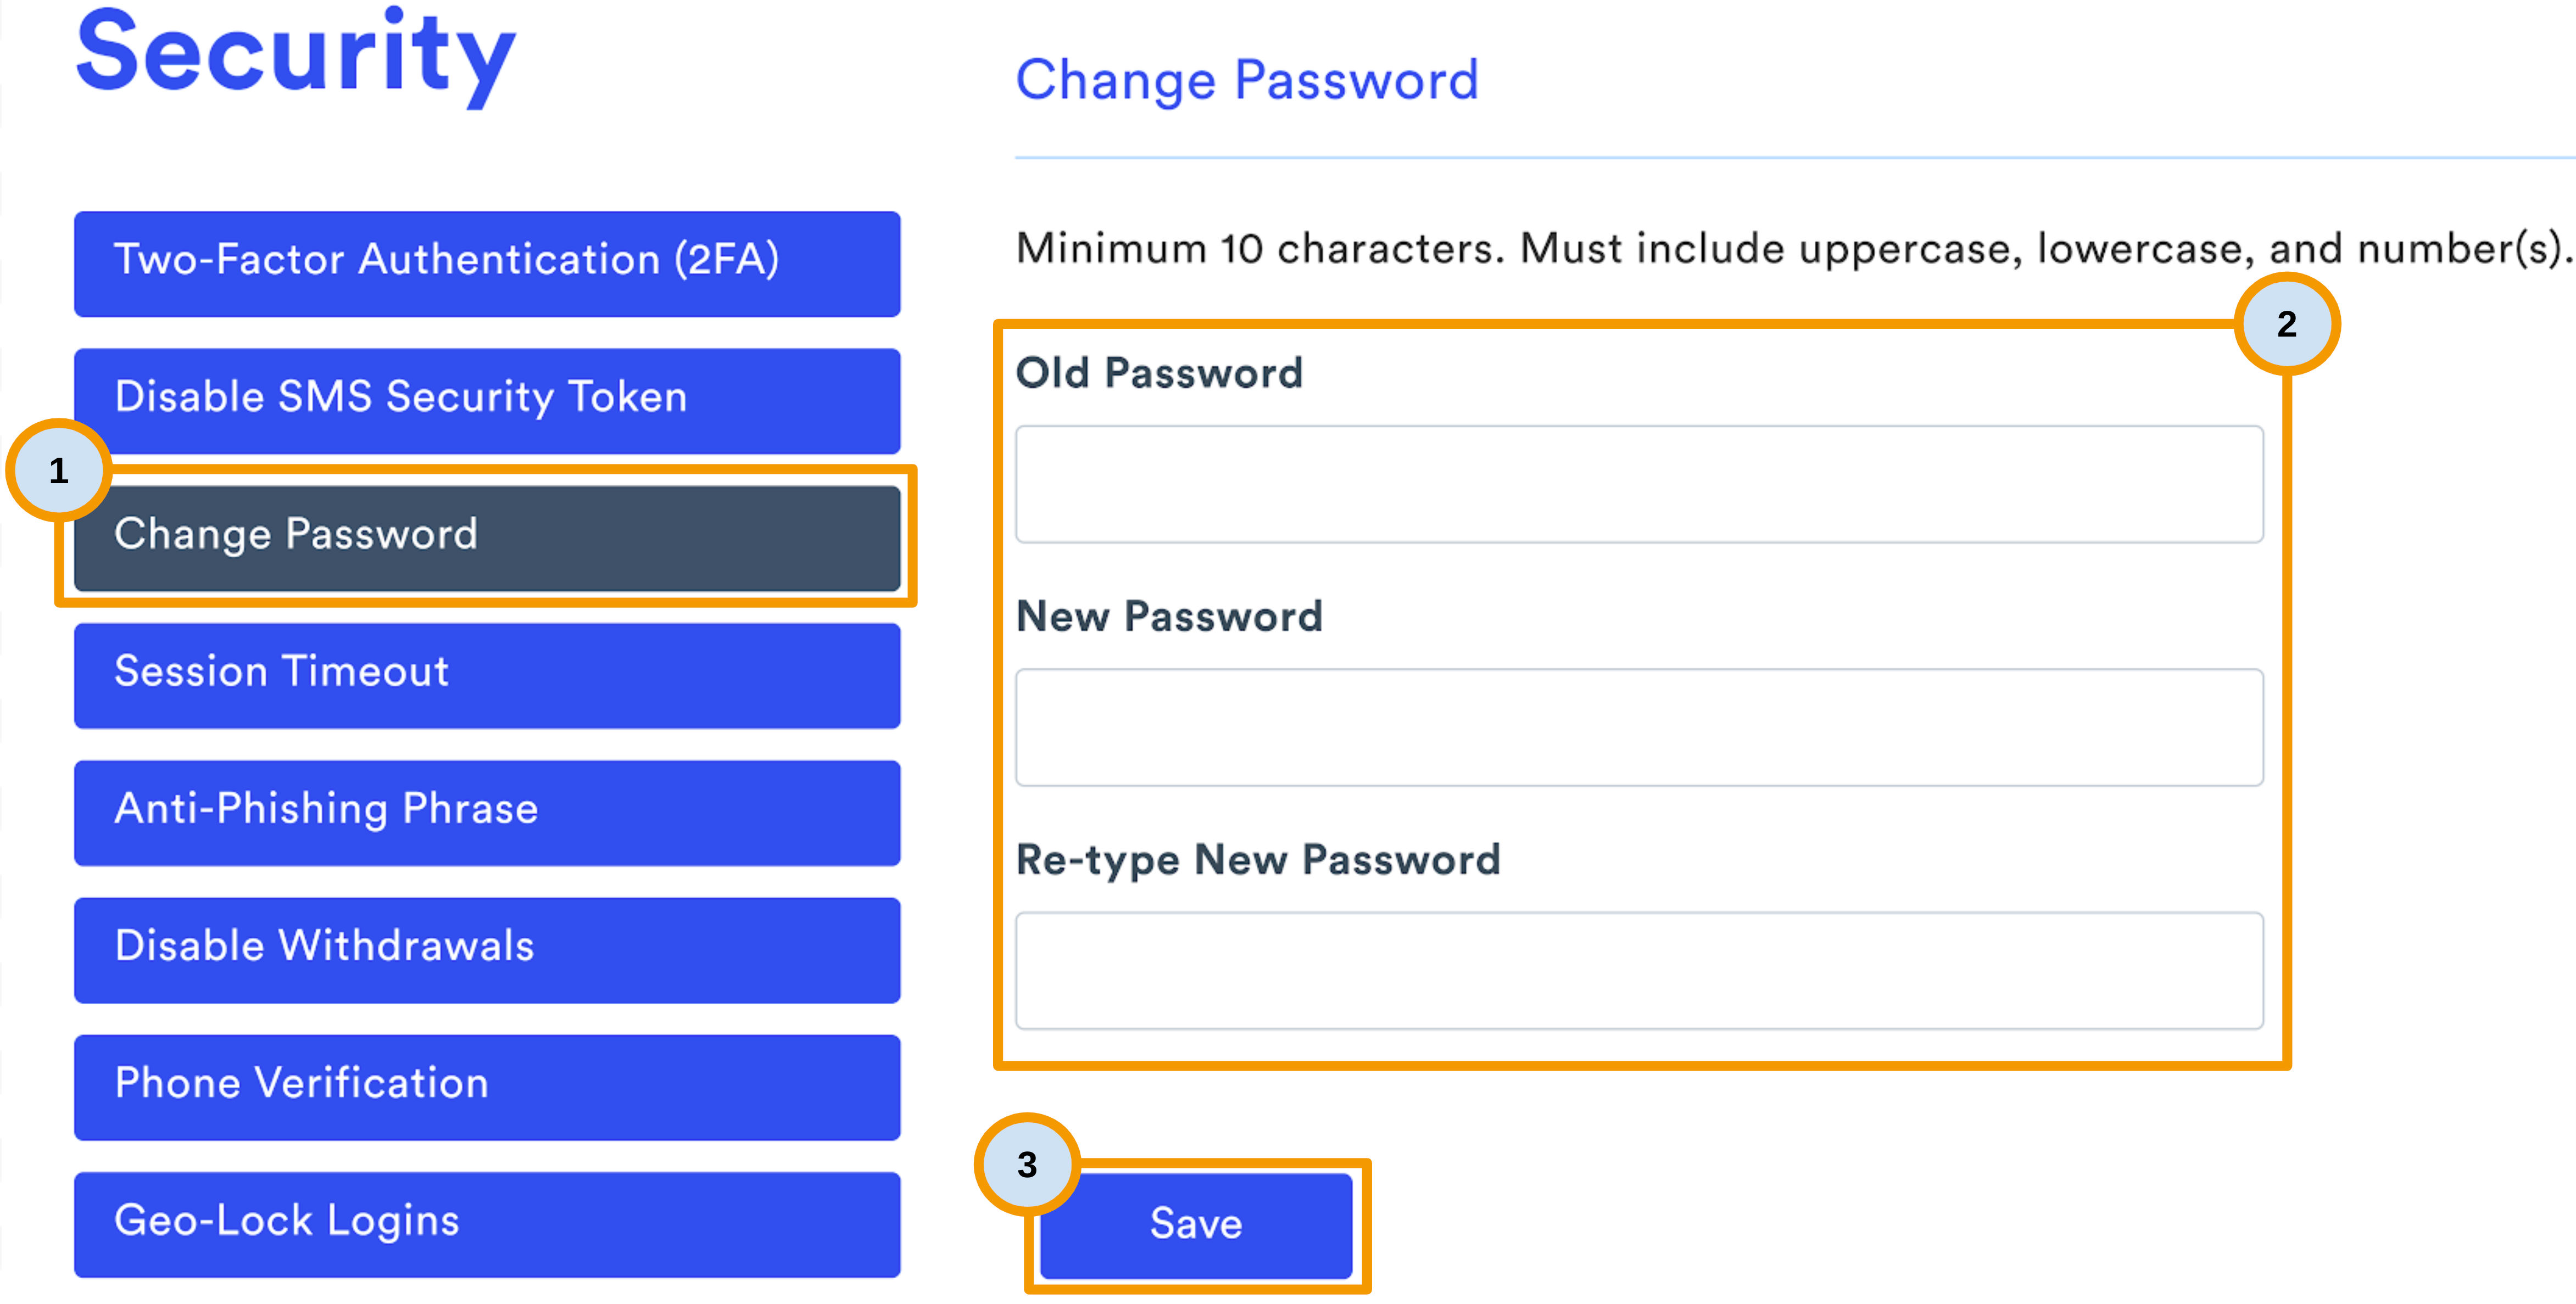 Change_Password_-_2FA_Disabled.png